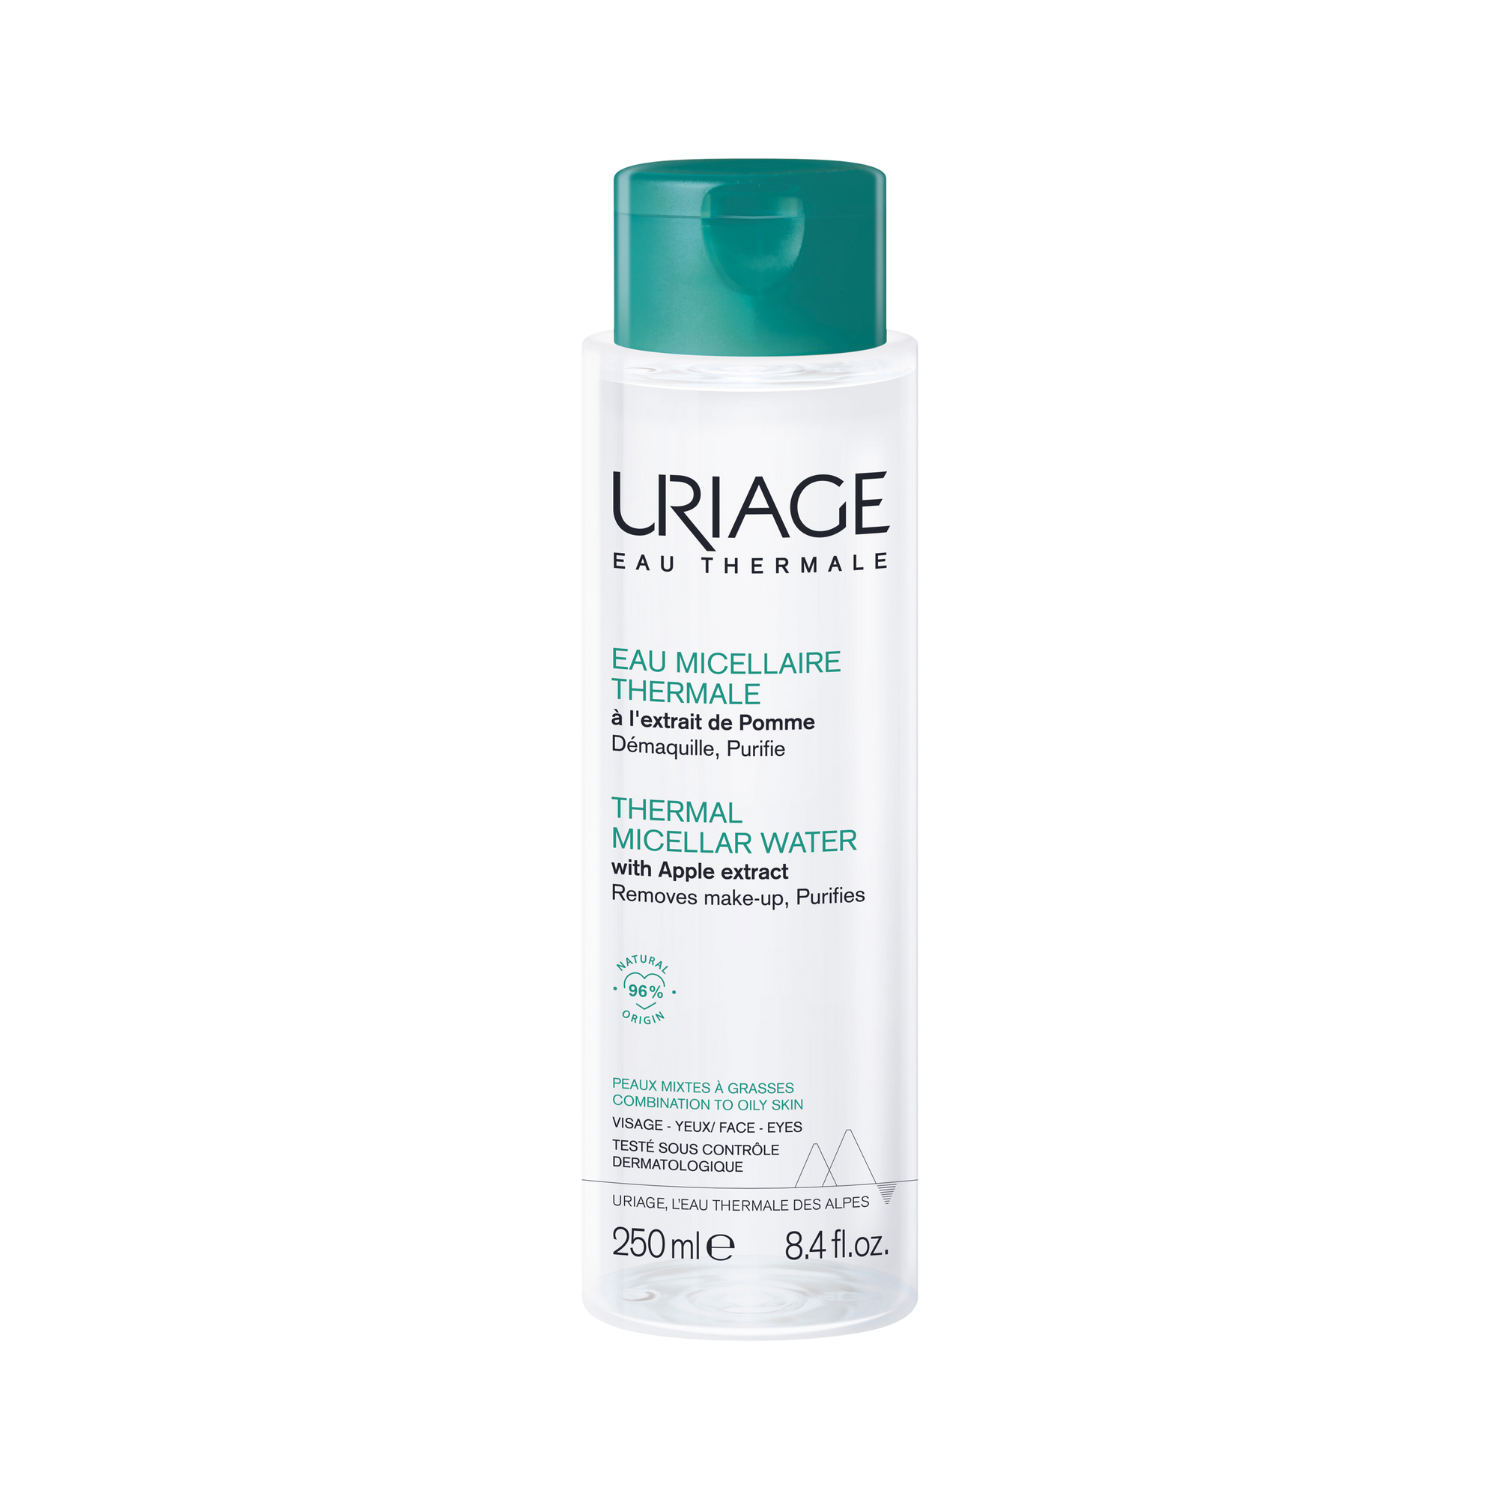 uriage-thermal-micellar-water-combination-to-oily-skin-250ml